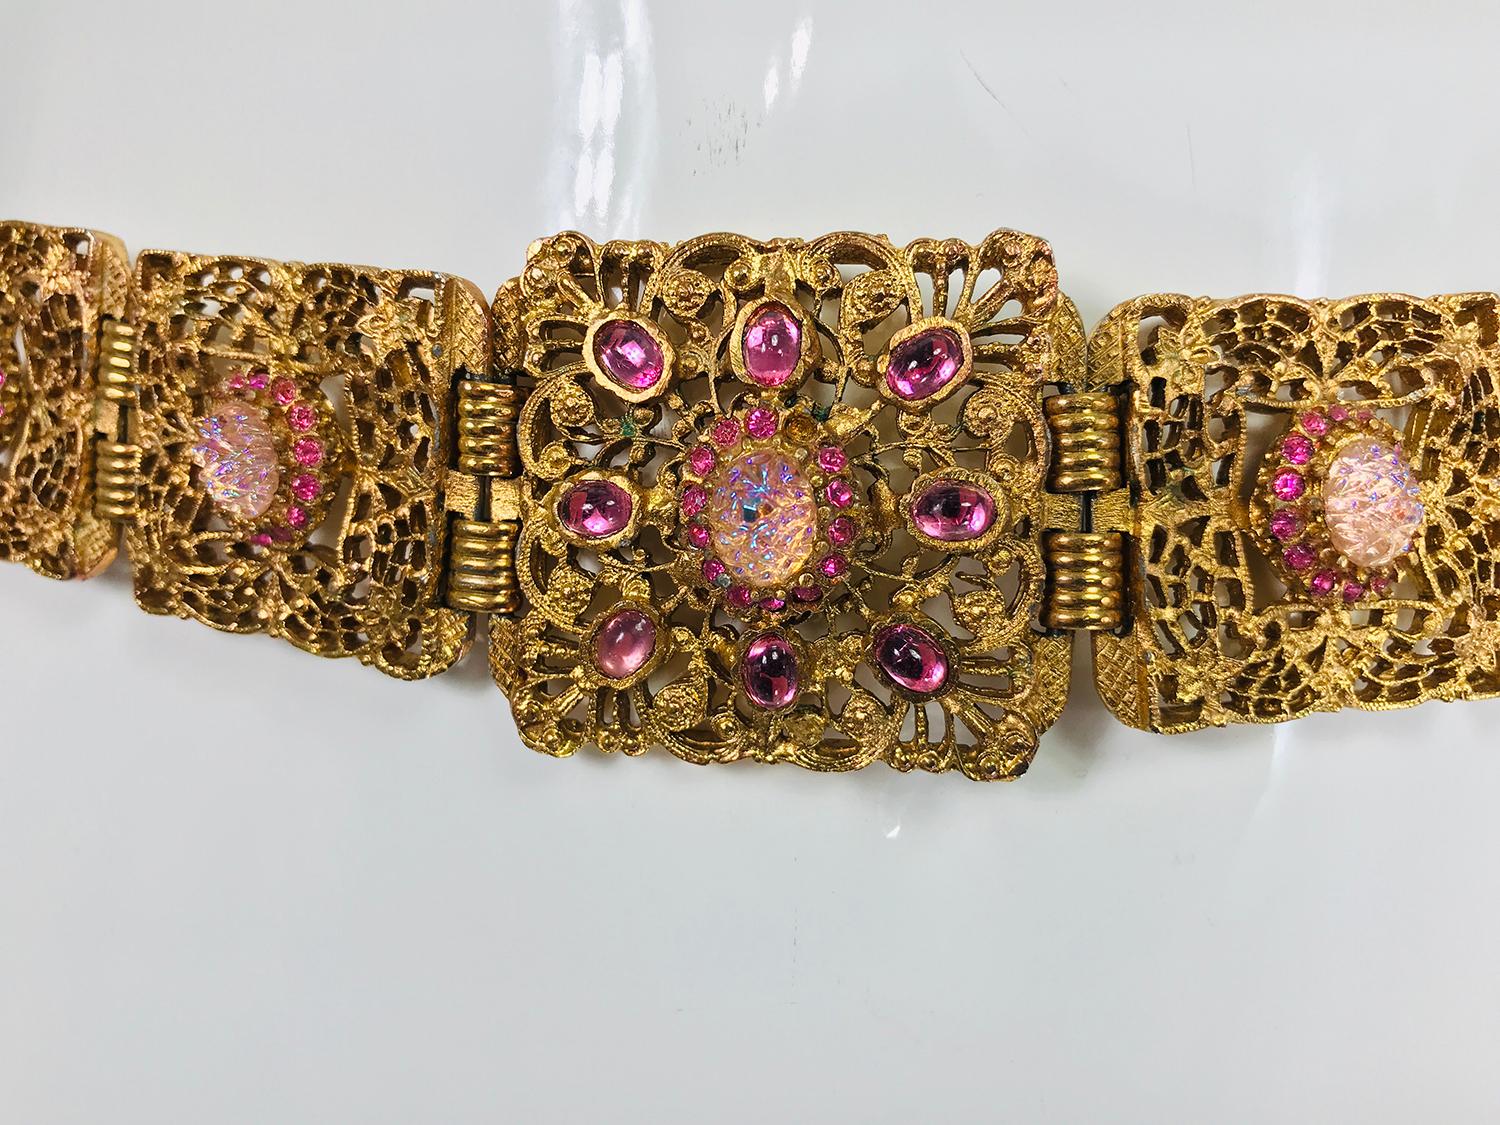 Gold metal filigree link belt with pink textured glass ovals and faceted rhinestones from the 1960s. This beautiful belt closes with a hidden hook at the side. The front of the belt features a square link, the other links are rectangular, all with